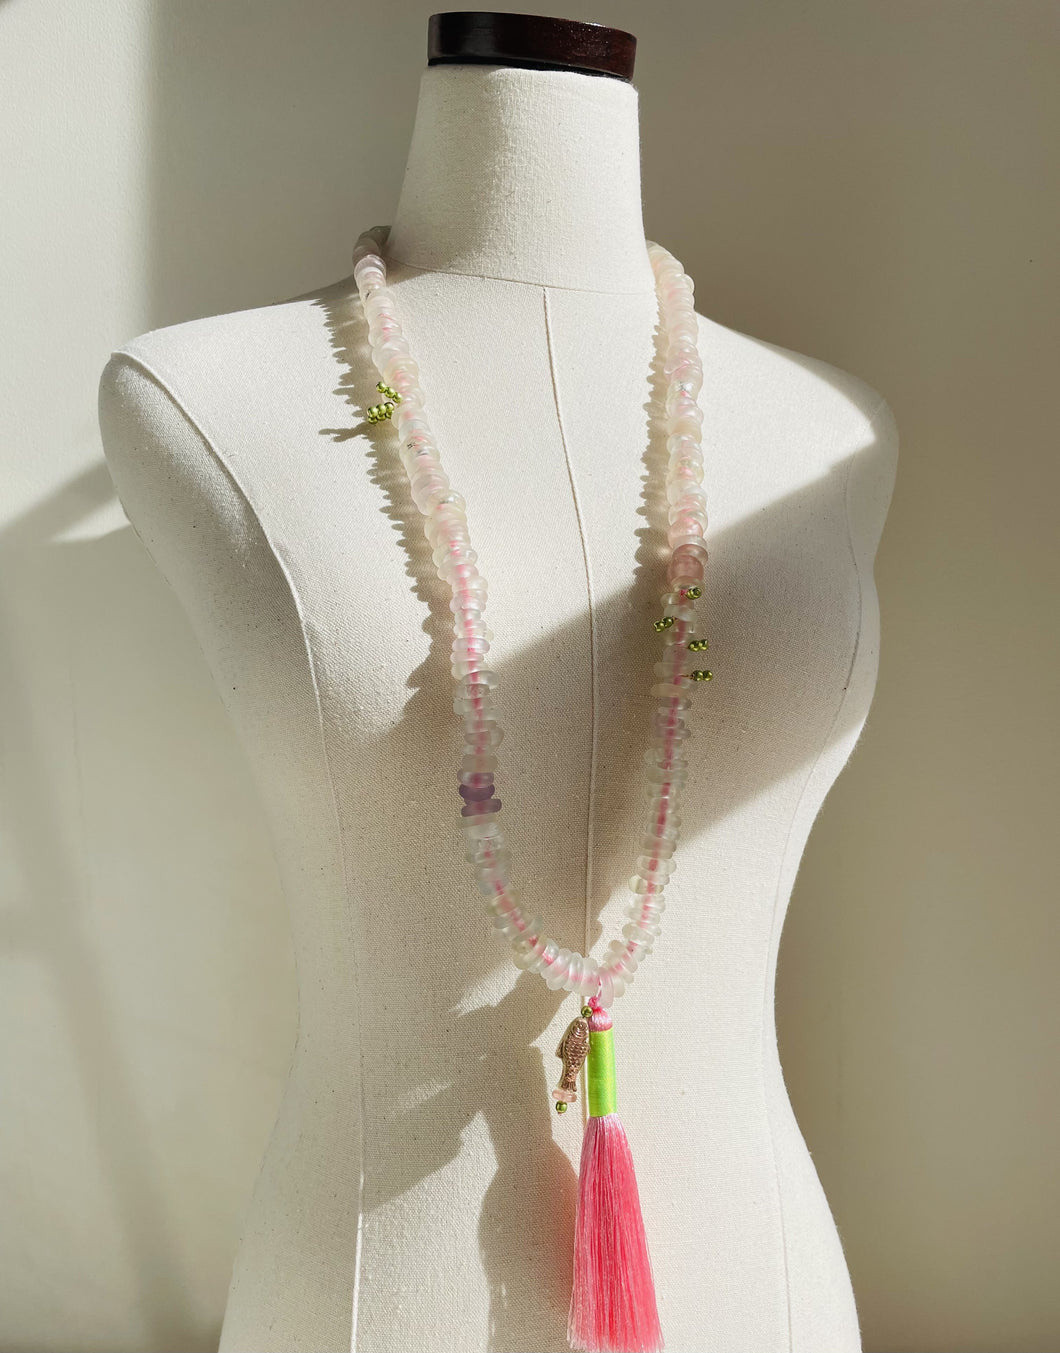 Antique Translucent European Glass Bead Necklace With Pink Tassel N71